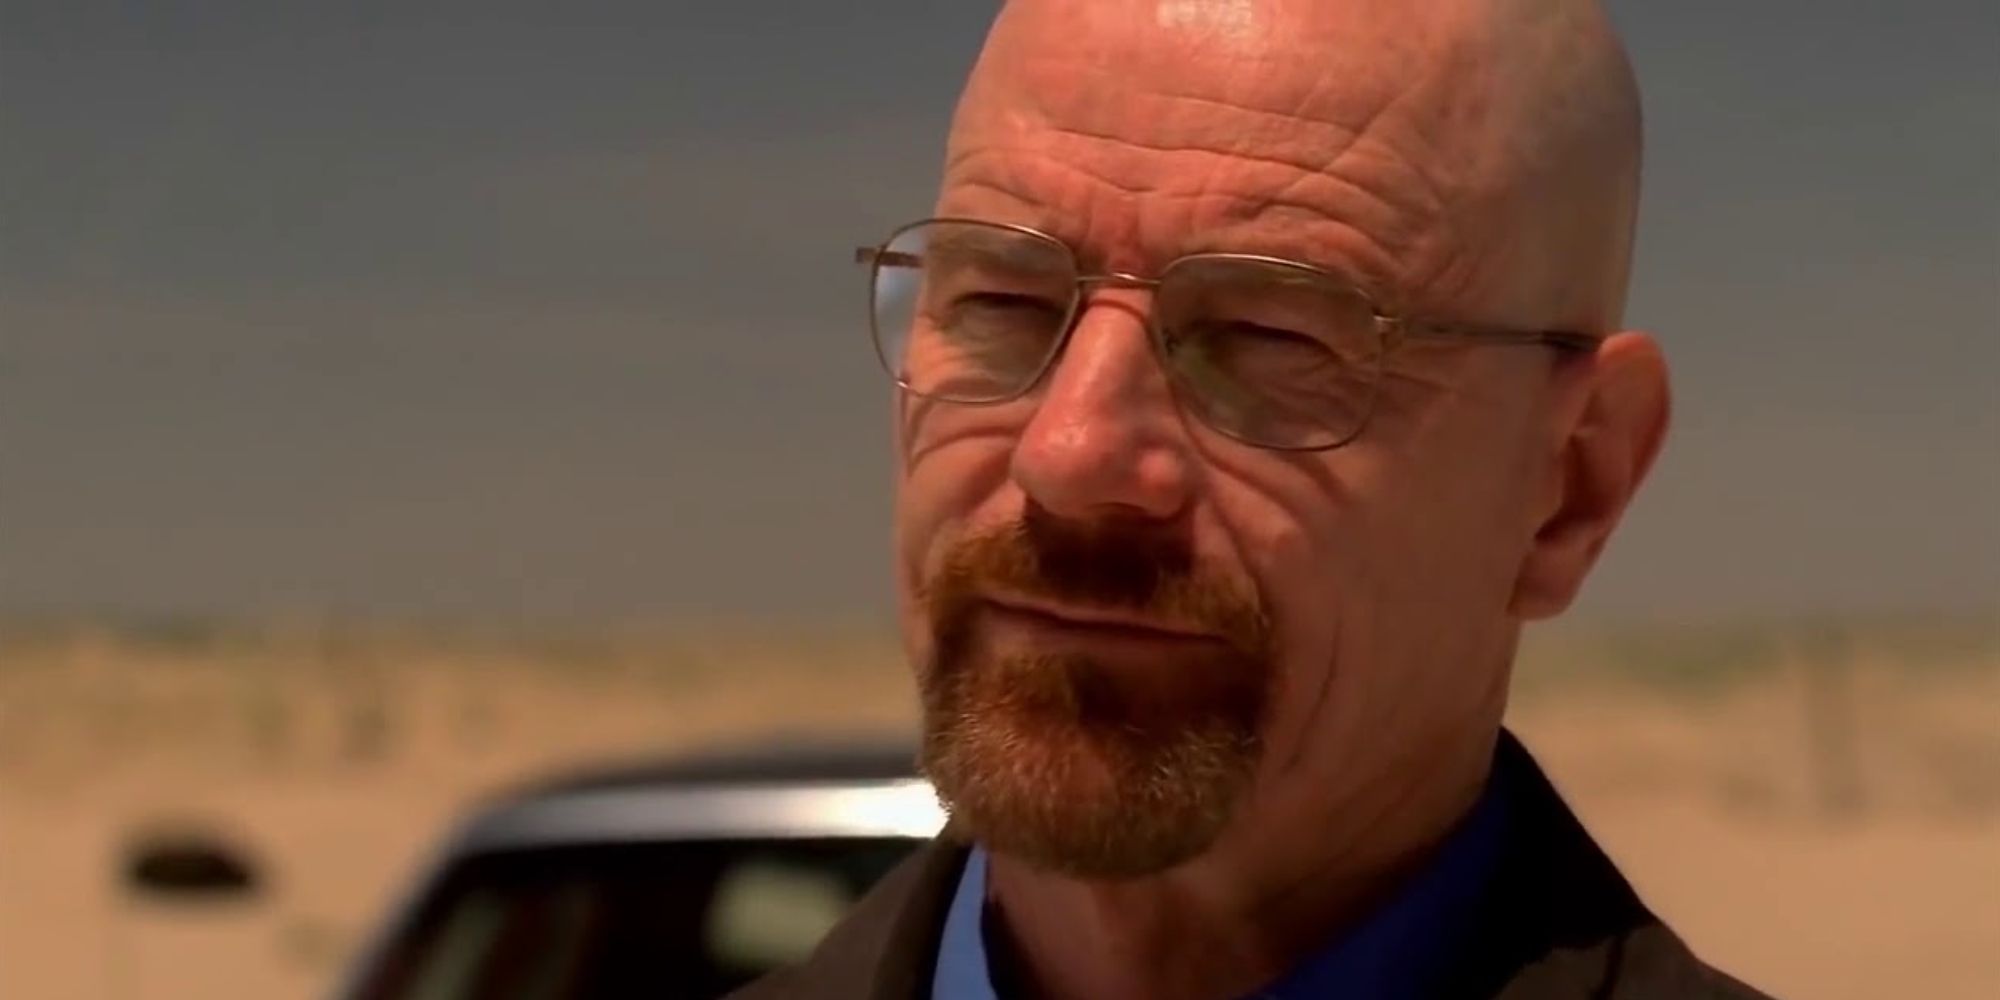 Walter White standing in the desert with a shaved head looking unimpressed in a scene from Breaking Bad